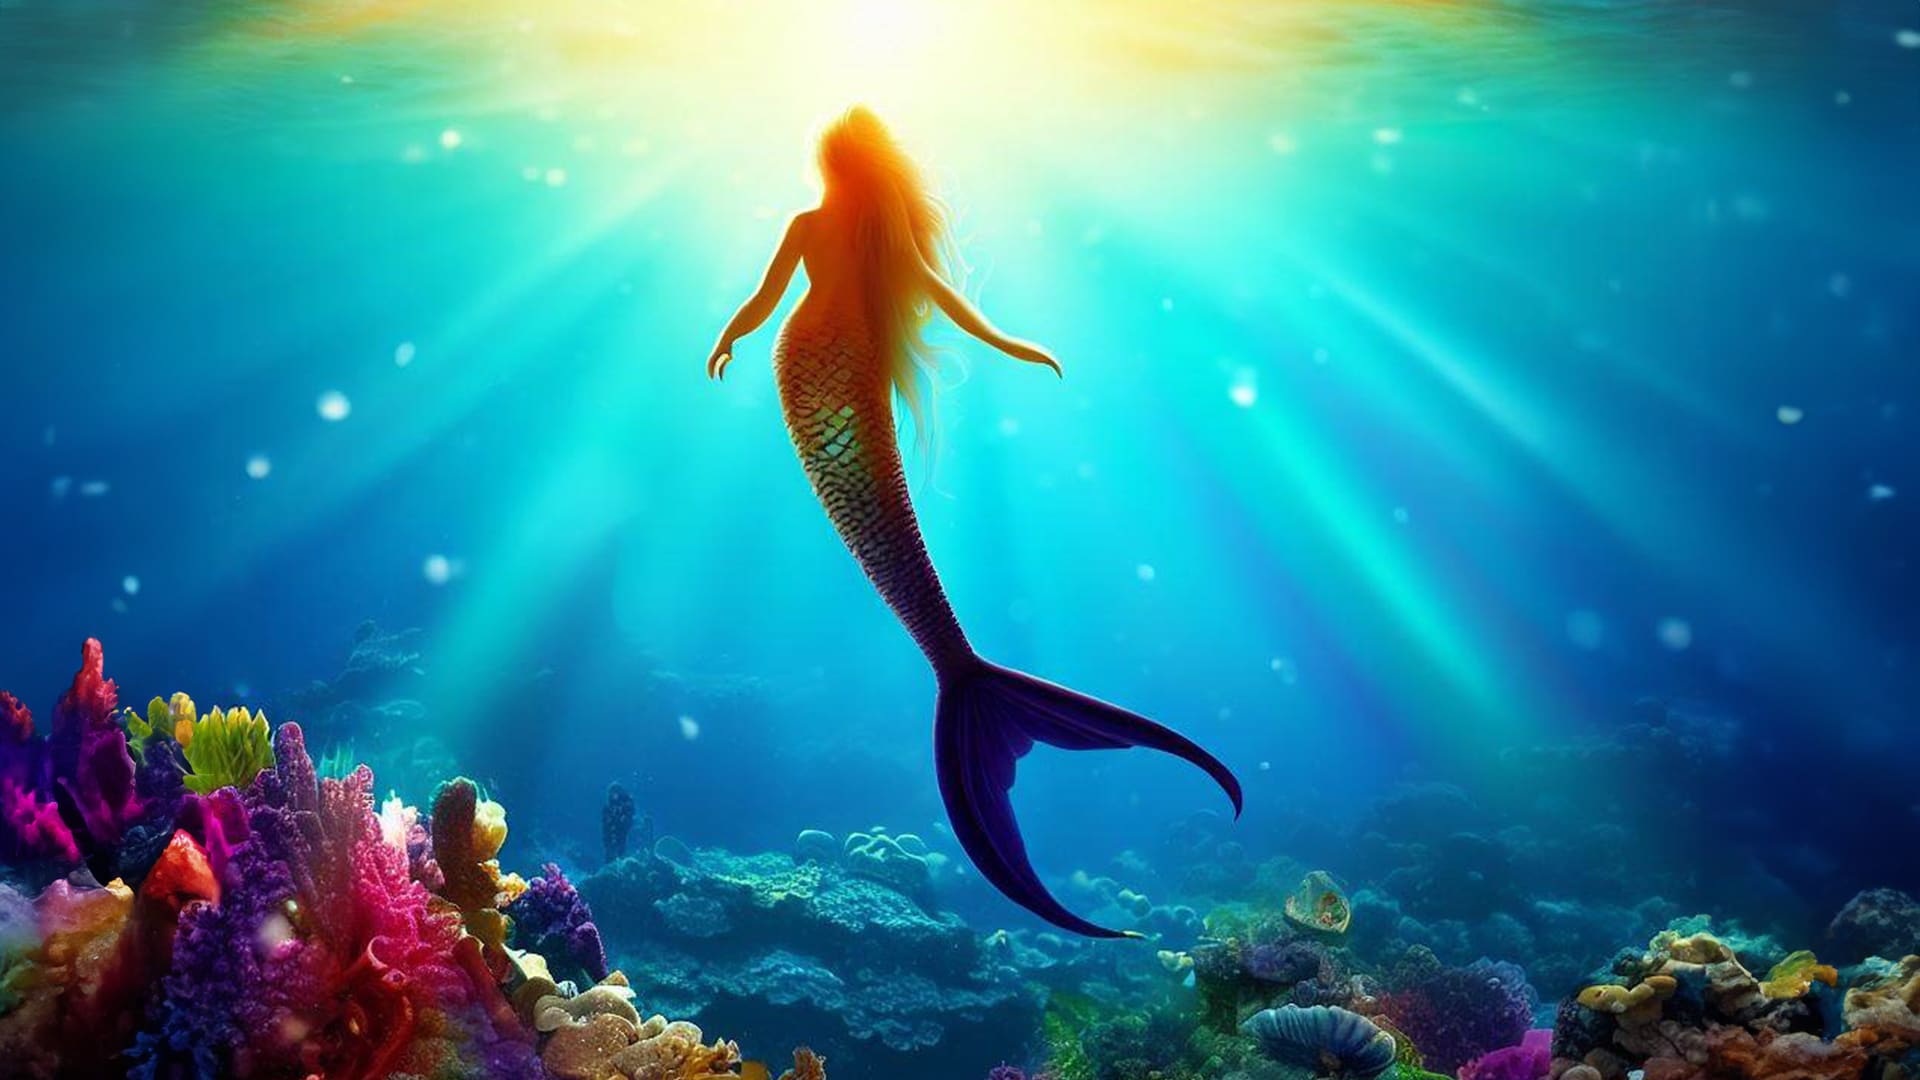 Stage by Stage The Little Mermaid artwork. Underwater, in the ocean. A mermaid with long hair, green scales and a dark blue tail fin swims above a colourful coral reef. A sun set shines through the ocean surface.